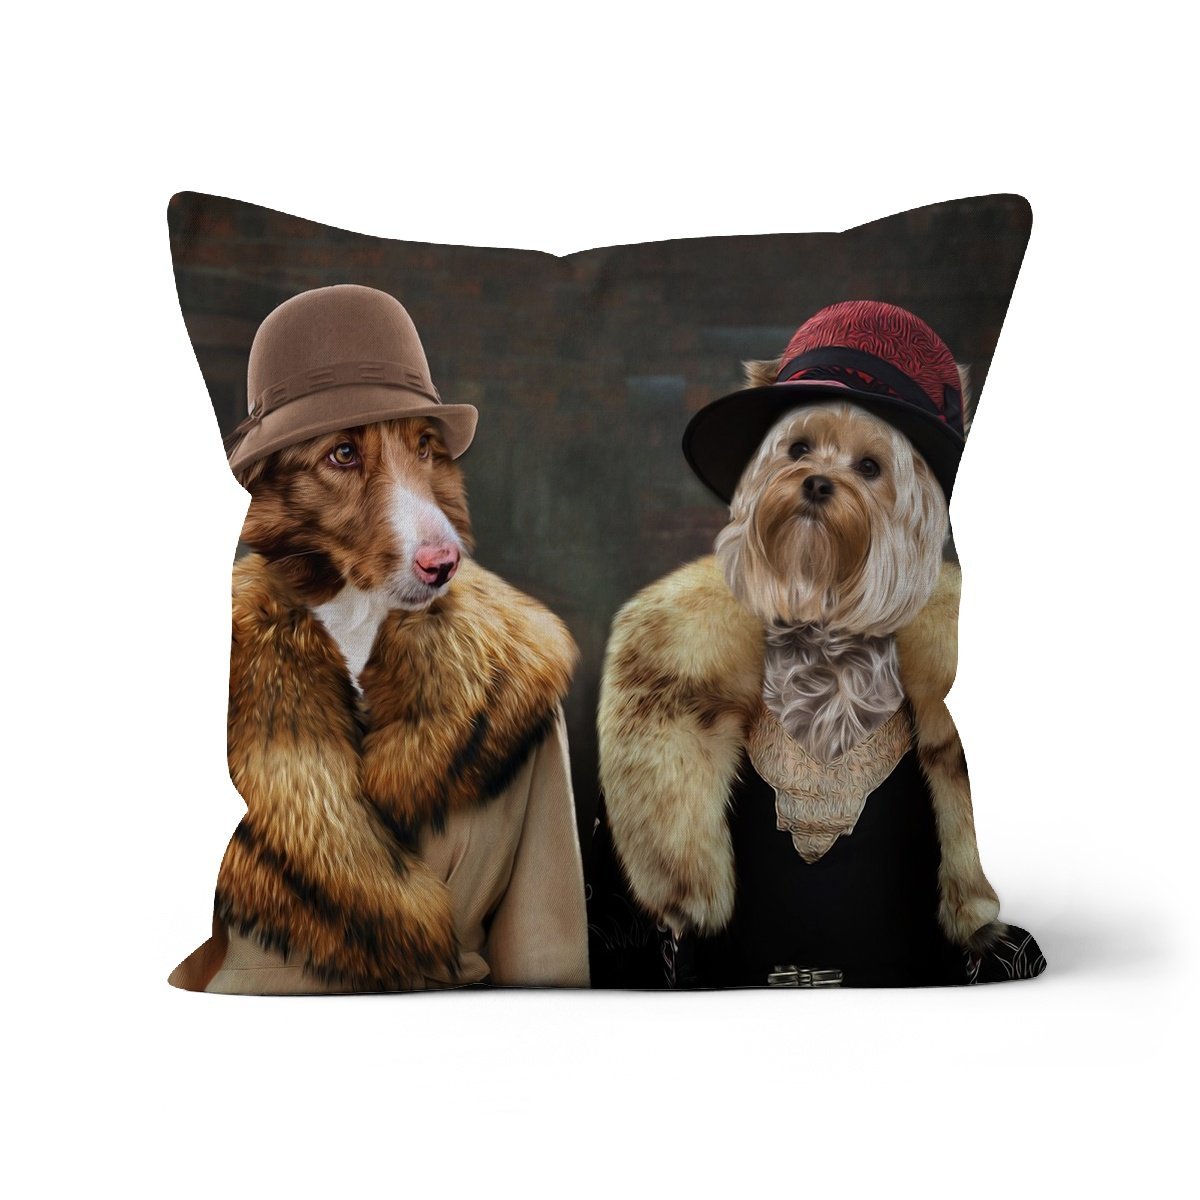 The Women (Peaky Blinders Inspired) 2 Pet: Custom Pet Cushion - Paw & Glory - #pet portraits# - #dog portraits# - #pet portraits uk#paw and glory, custom pet portrait cushion,custom pet pillows, pillow personalized, custom pillow cover, dog personalized pillow, pillow with pet picture